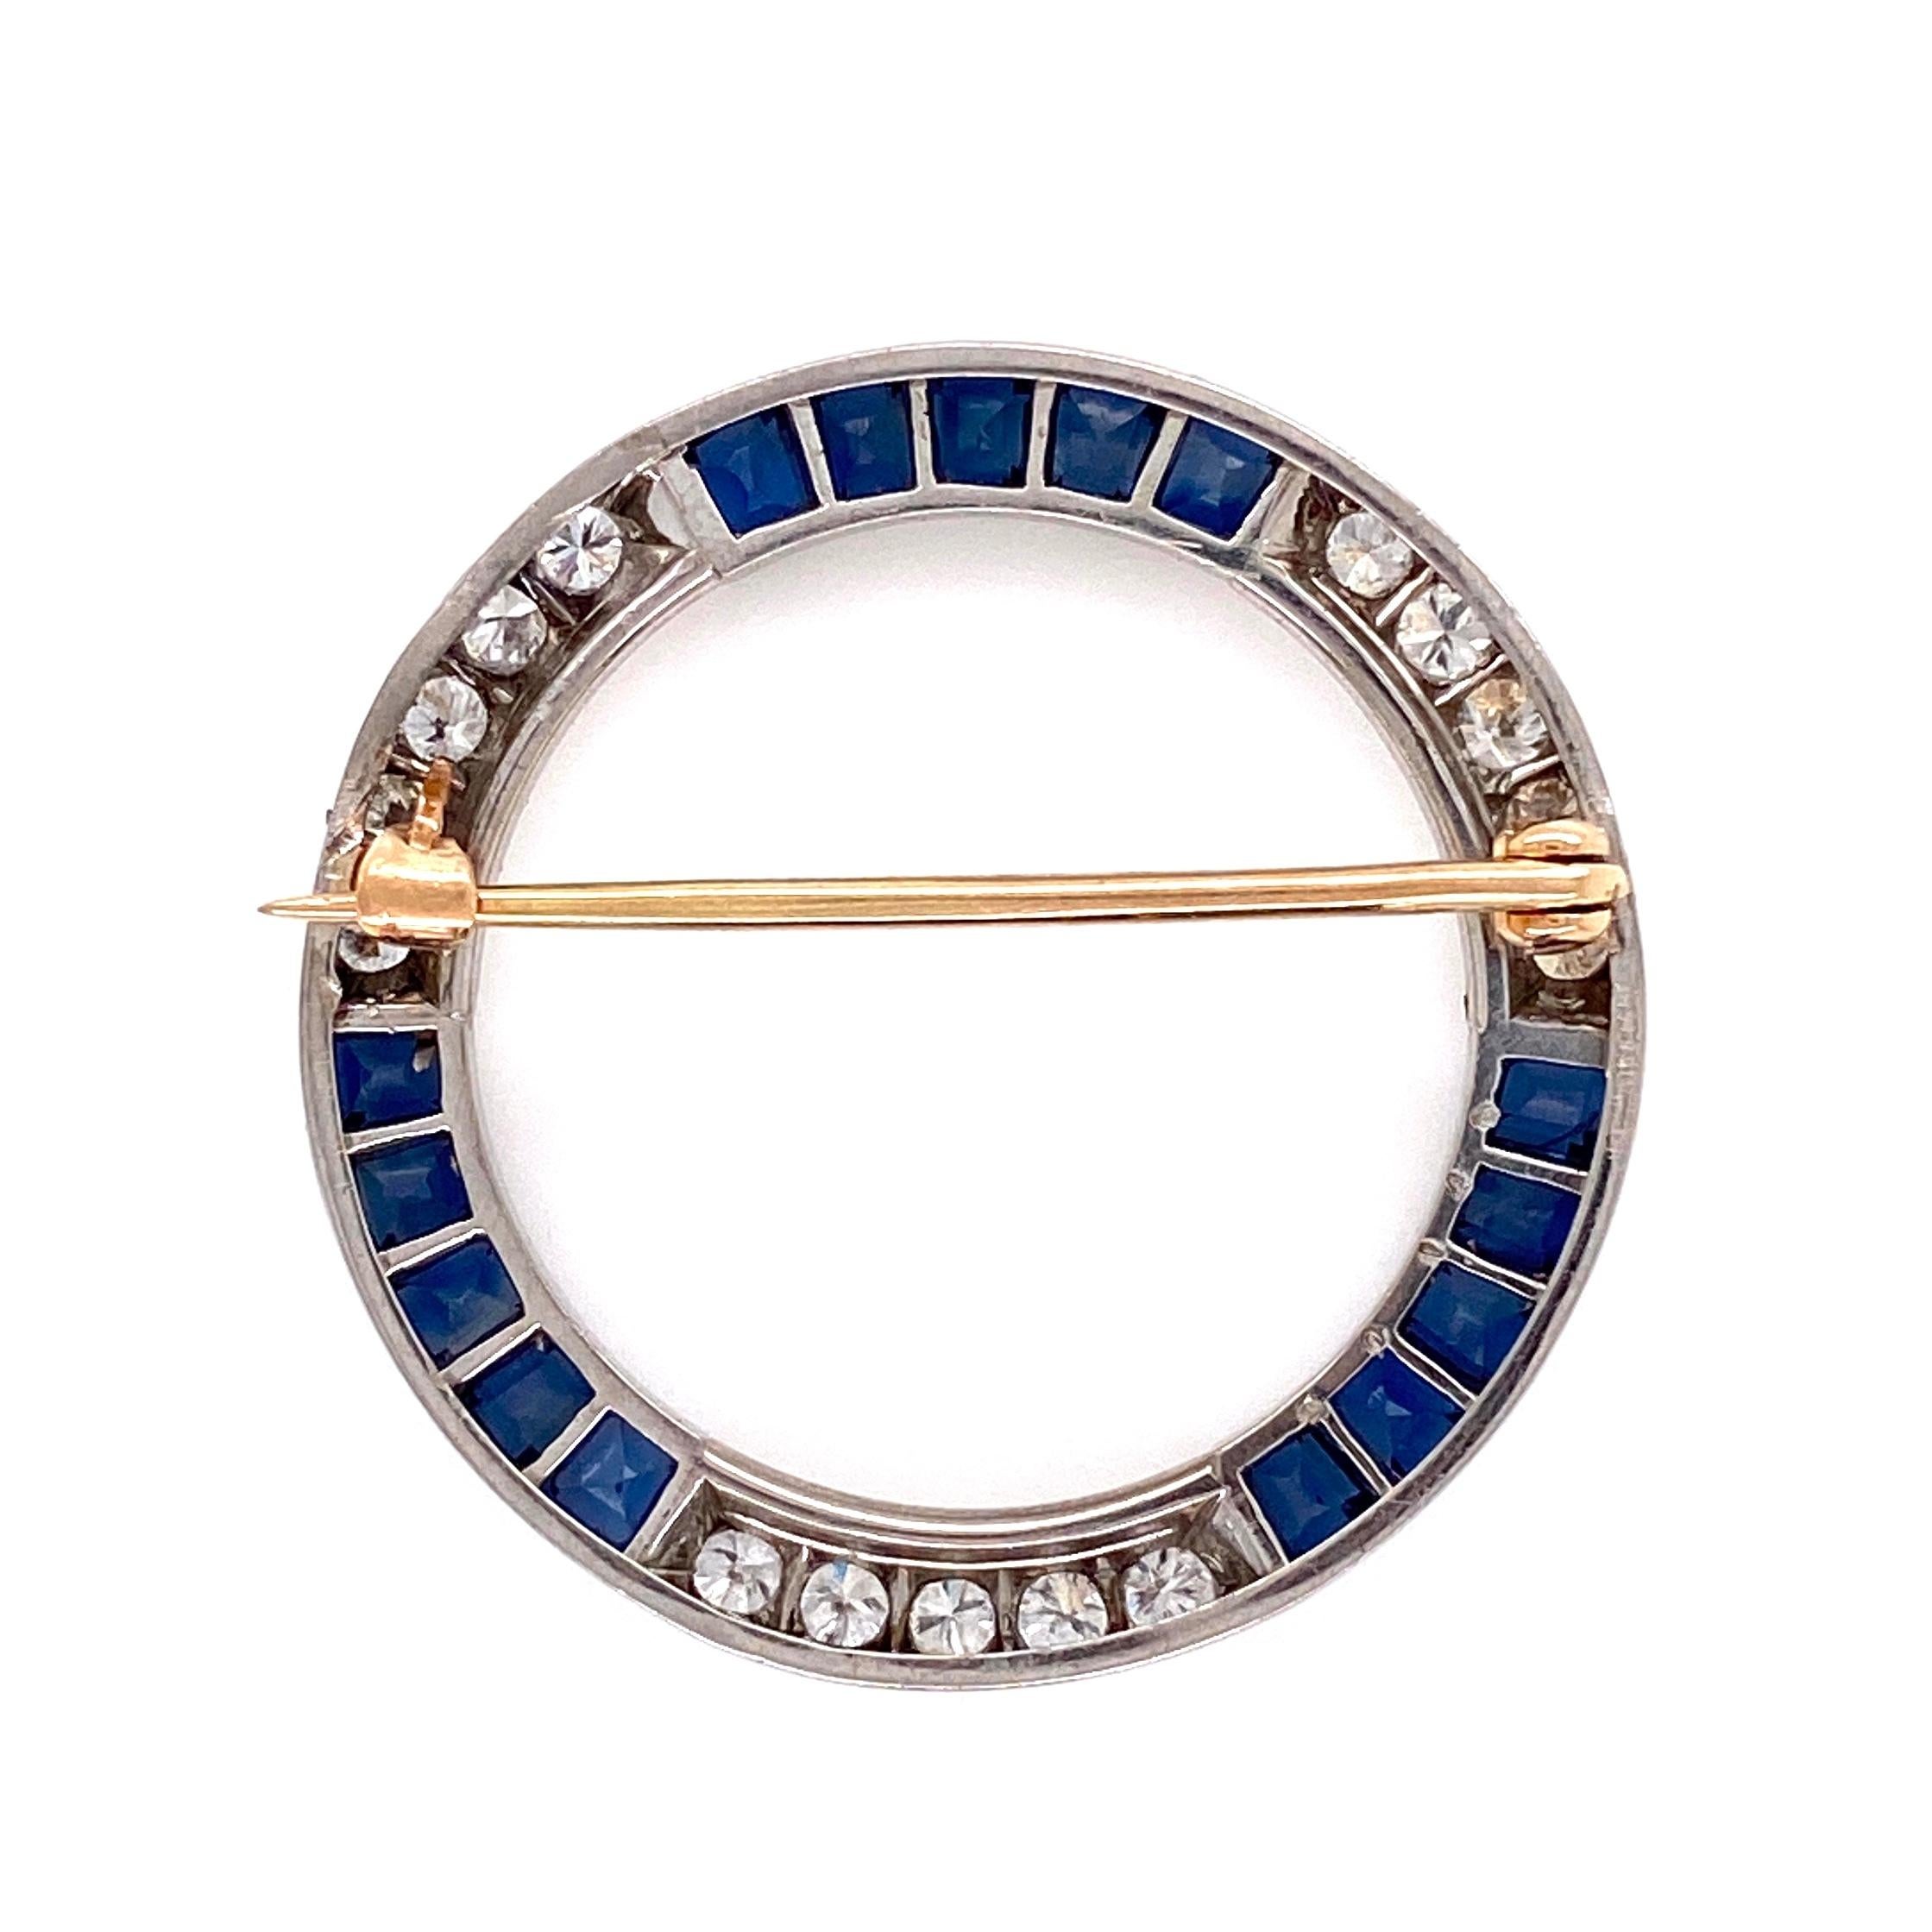 Beautiful Art Deco Sapphire and Diamond Platinum Circle Brooch securely Hand set with 15 French-cut Sapphires and 15 Diamonds, approx. 0.60tcw. Hand crafted Platinum mounting. Measuring approx. 1.25”in diameter. Add a touch of Glamor to any outfit!